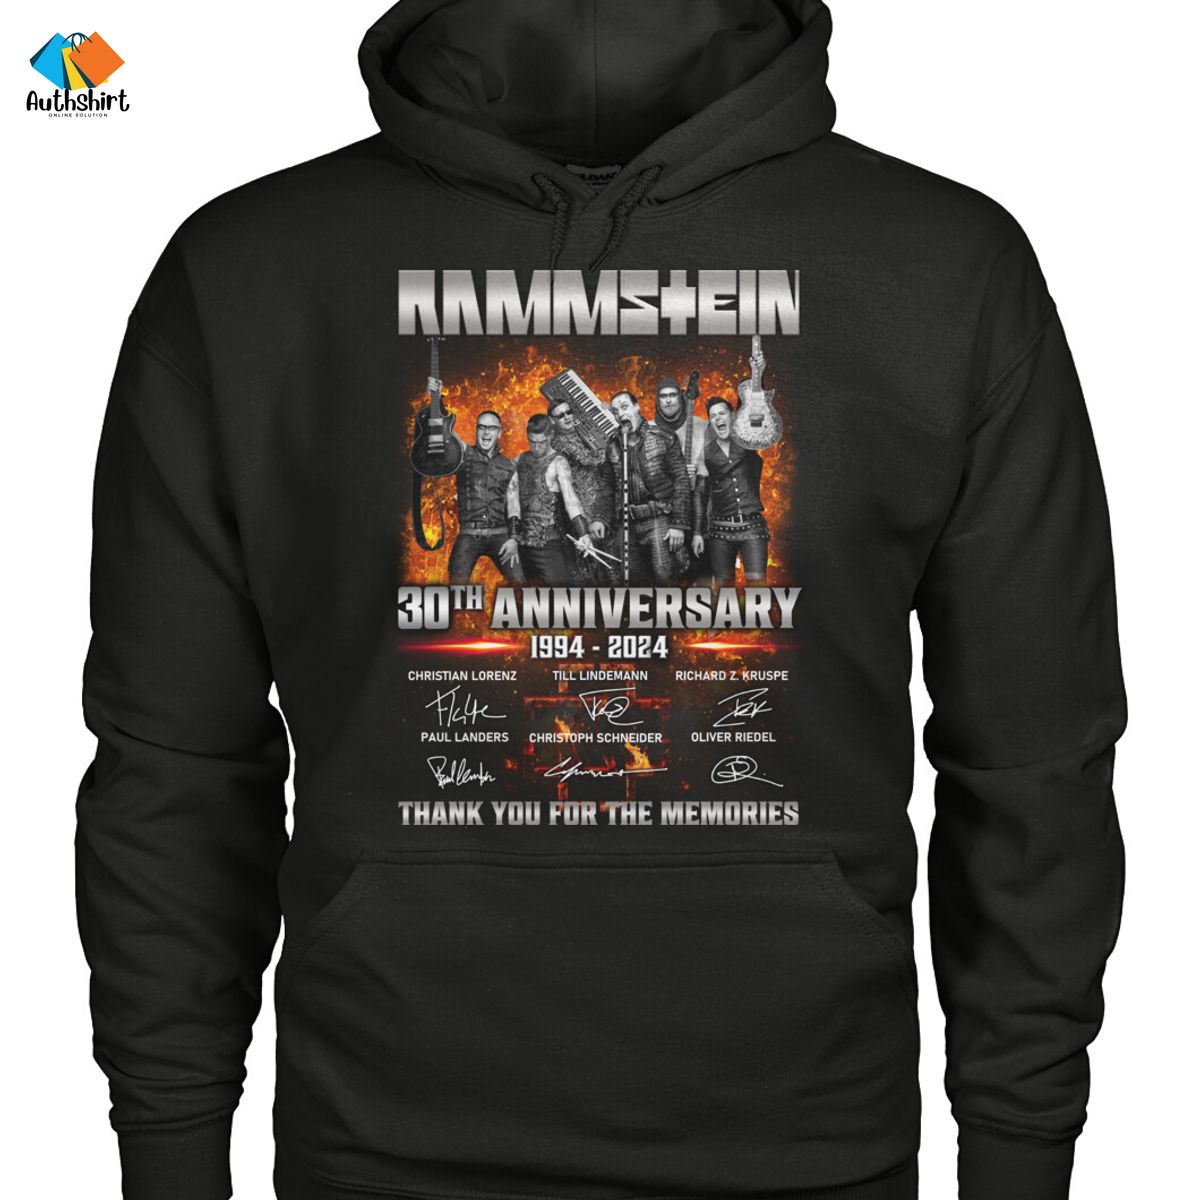 Rammstein 30th Anniversary Thank You For The Memories Shirt